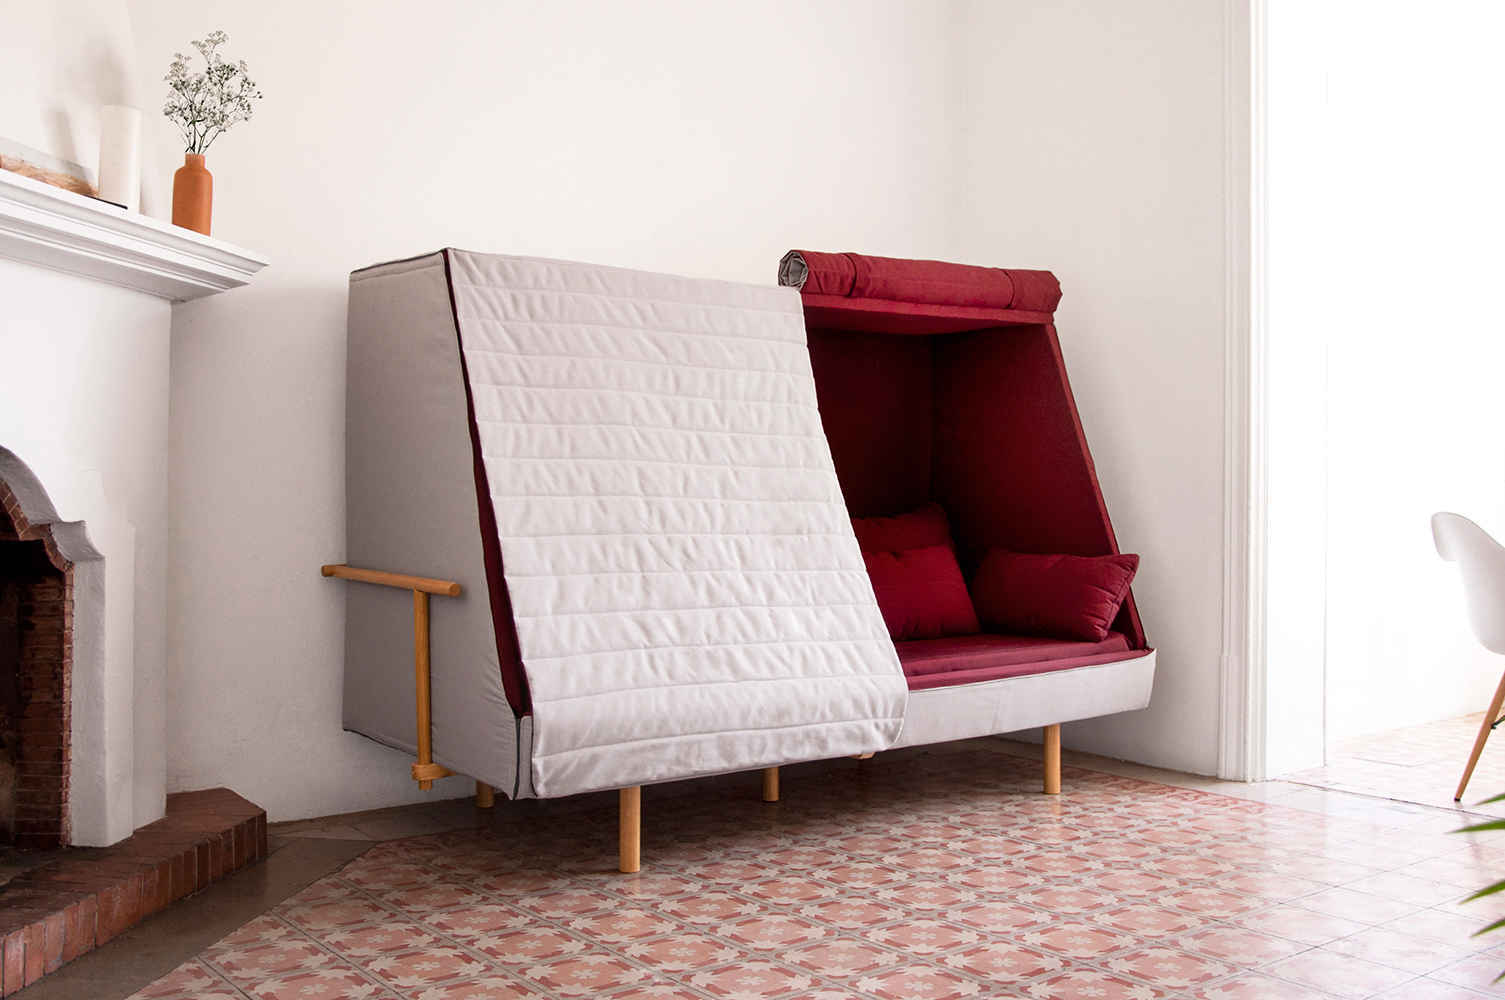 Furniture for Small Spaces, Space Saving Furniture